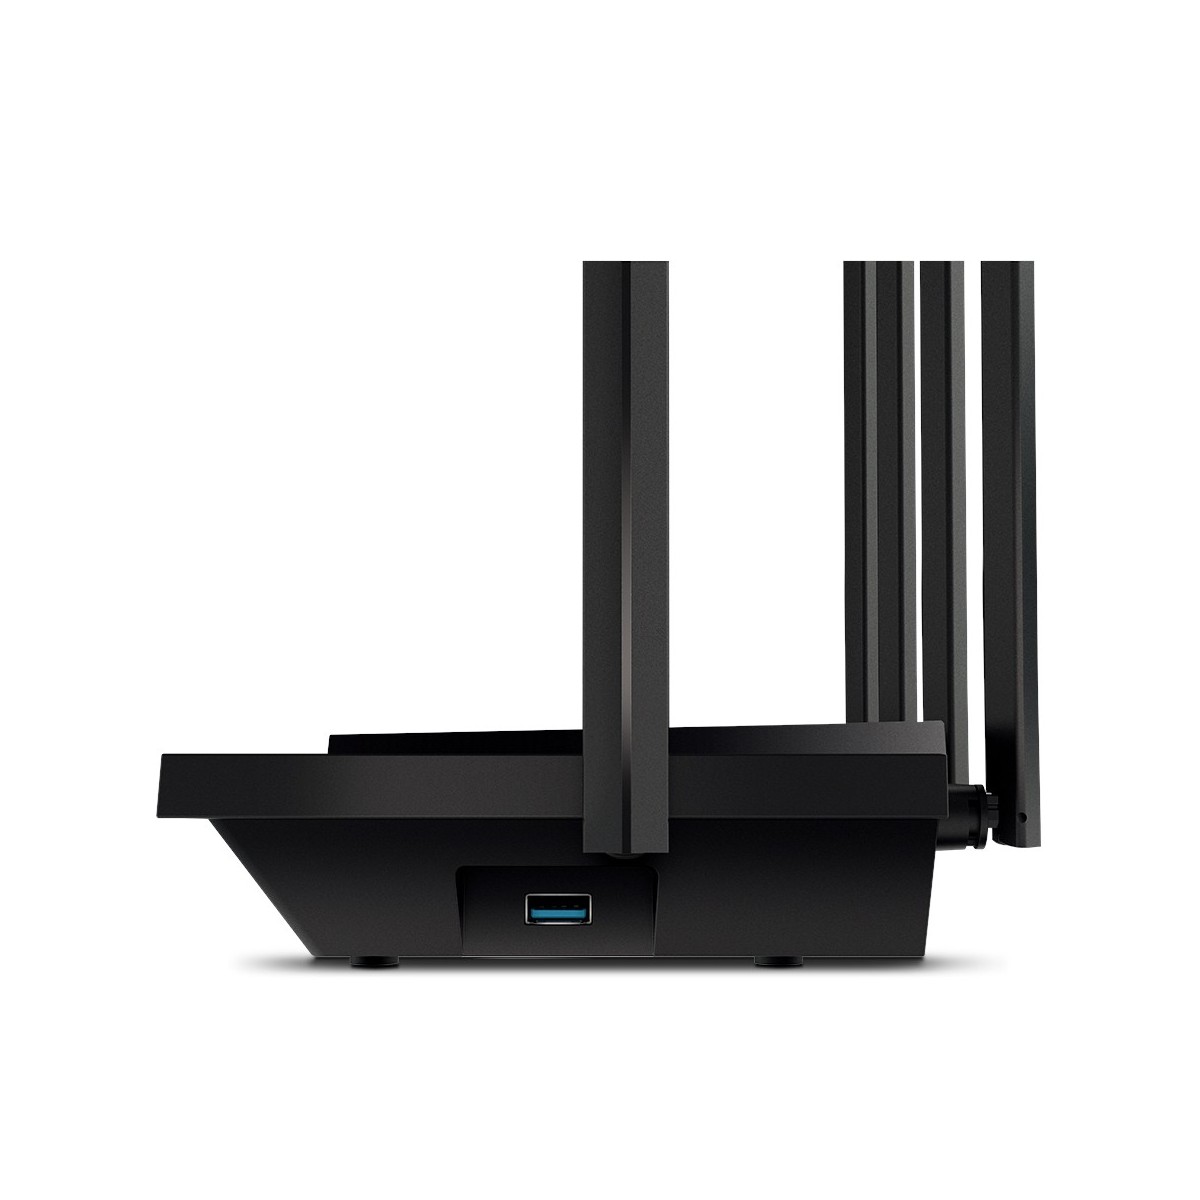 TP-LINK Archer AX72 wireless router Gigabit Ethernet Dual-band 2.4 GHz 5 - Router - 1 Gbps